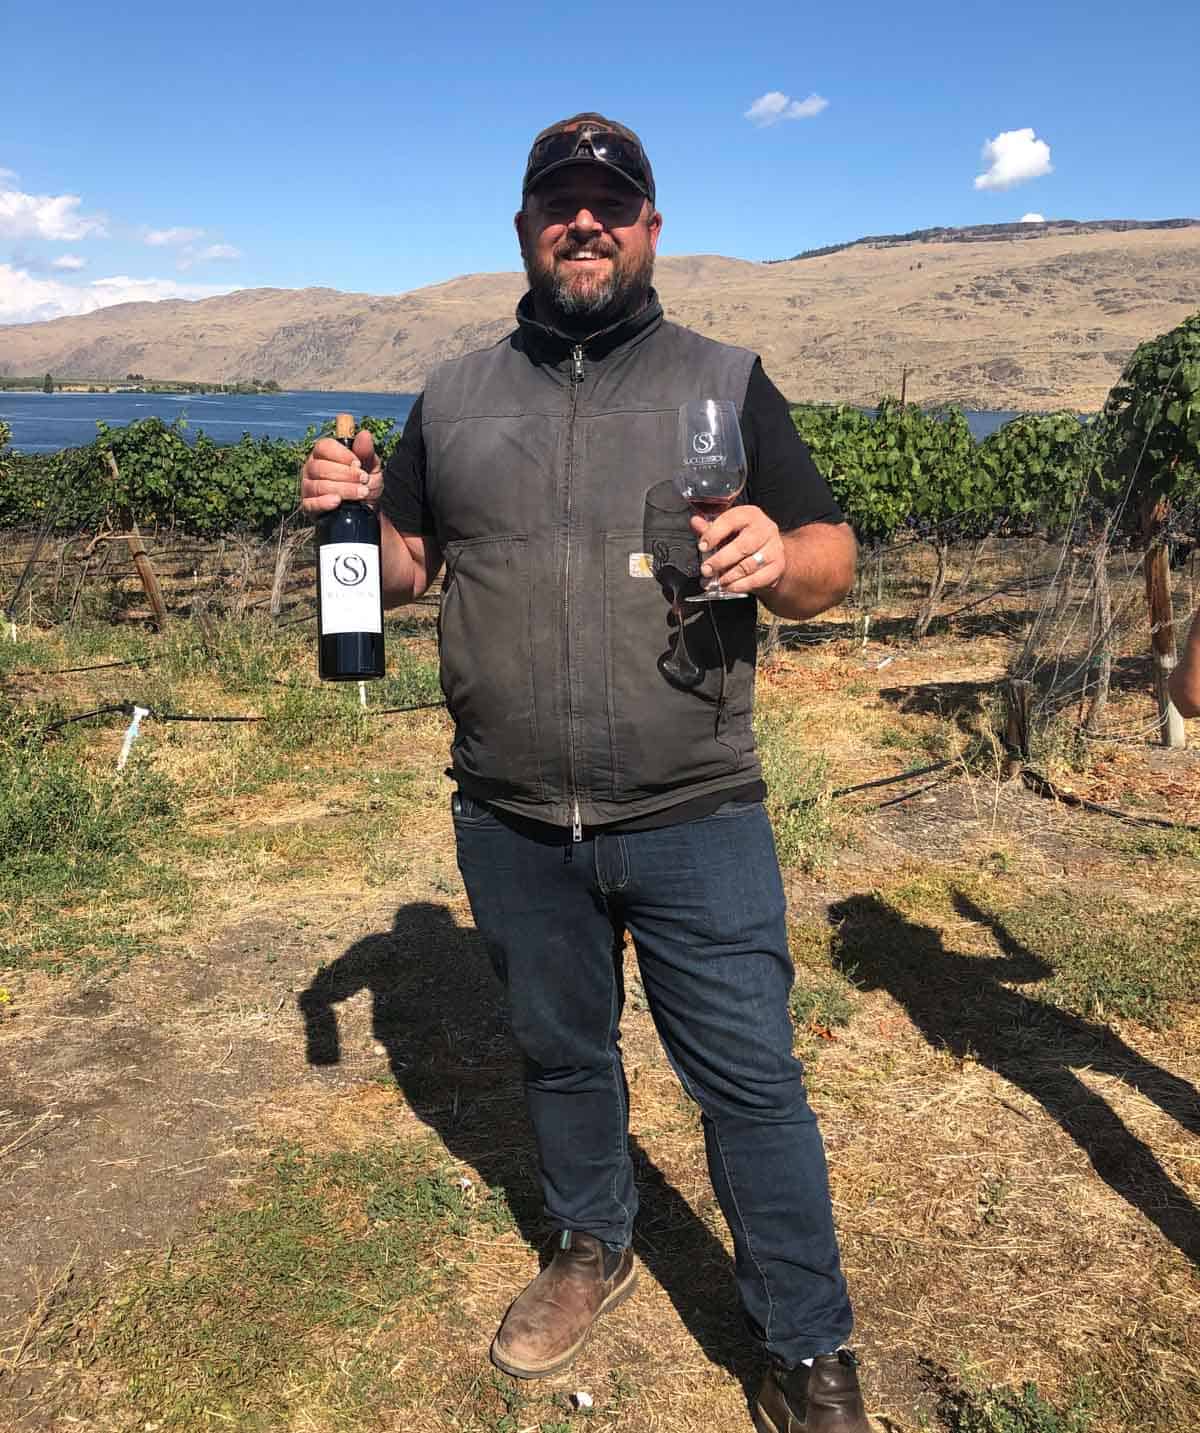 Owner of Succession Winery, Brock Lindsay